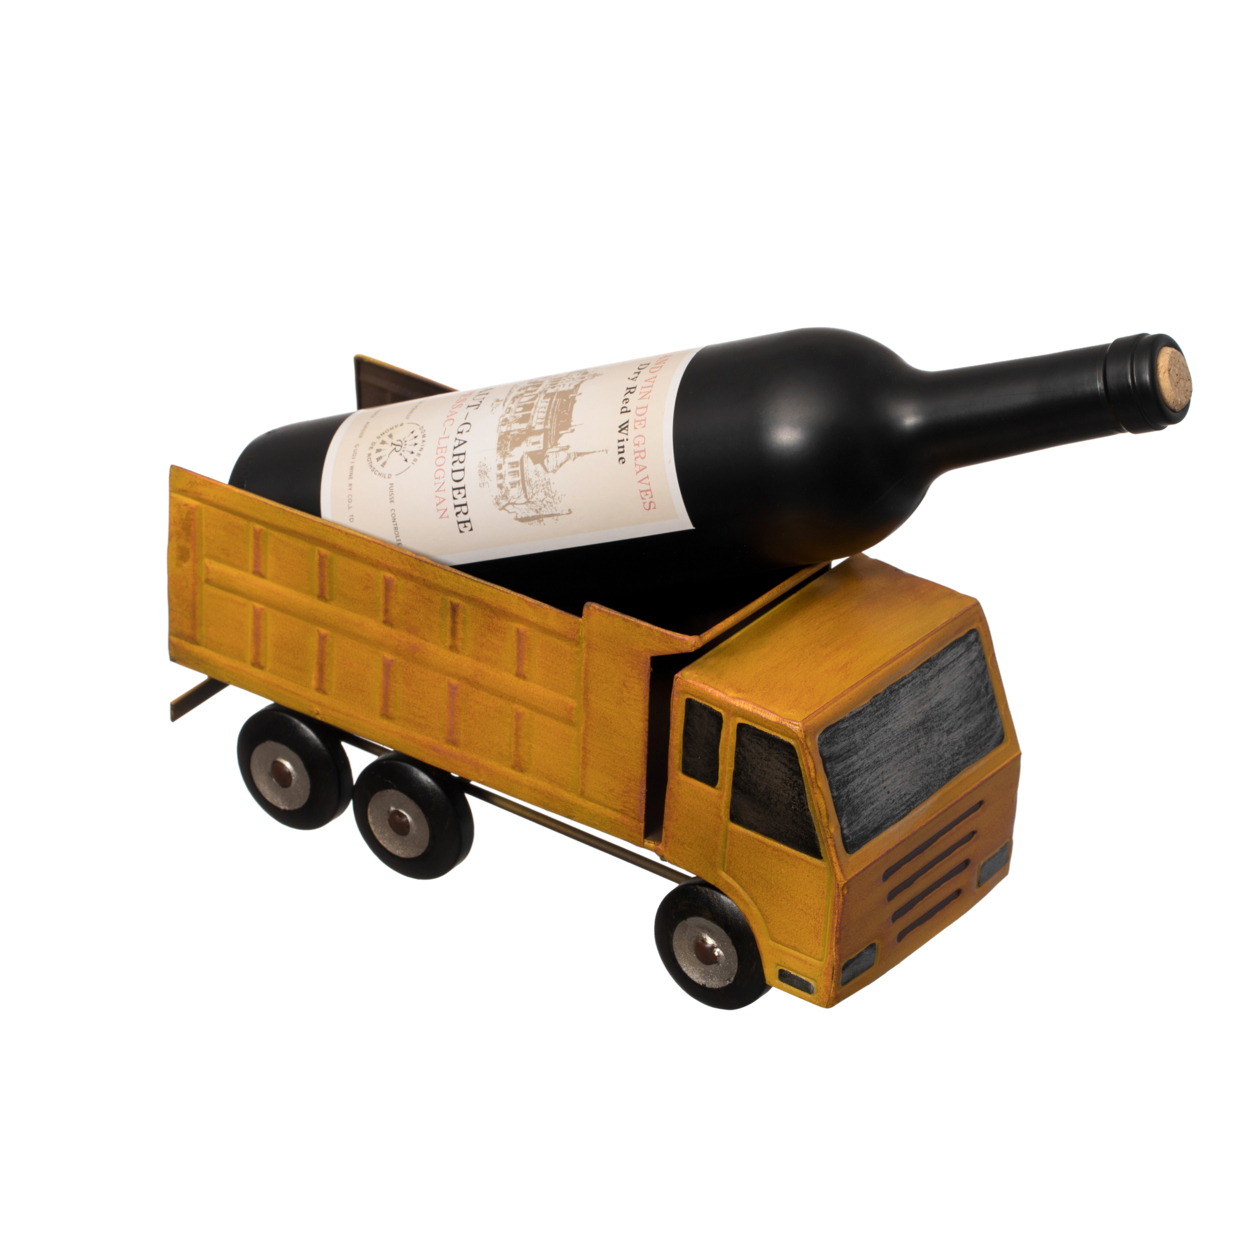 Decorative Rustic Metal Yellow Single Bottle Truck Wine Holder For Tabletop Or Countertop